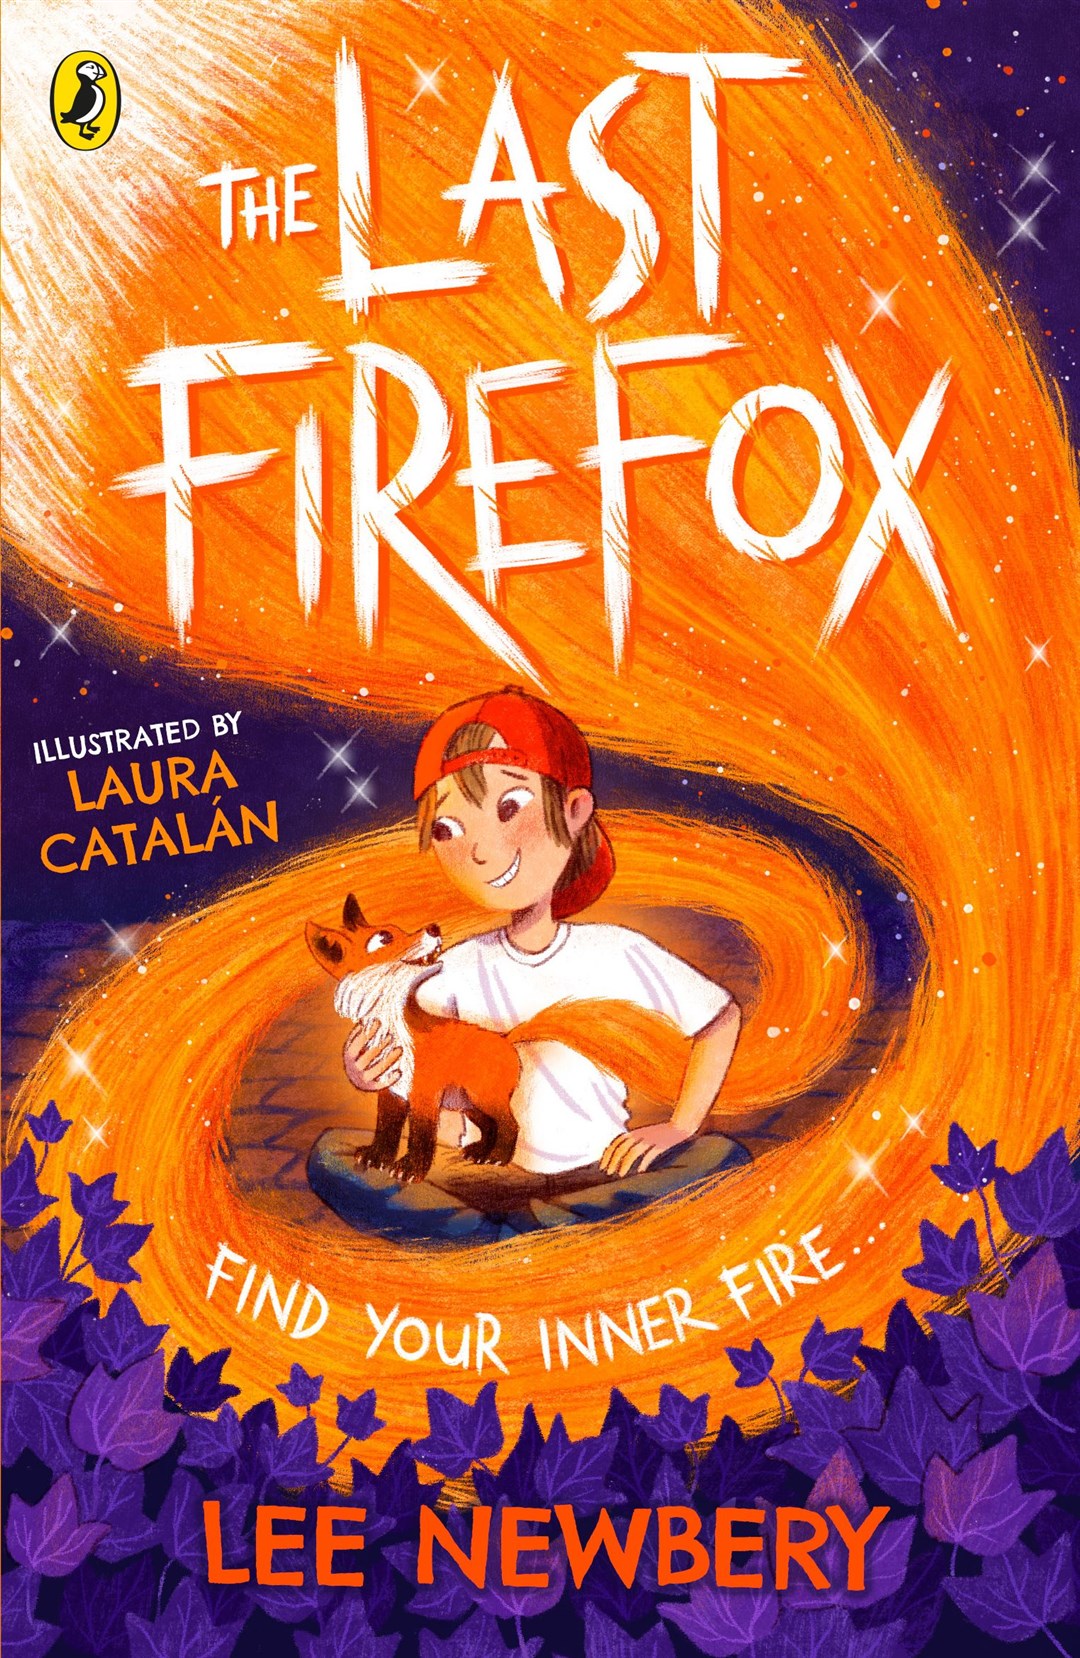 The Last Firefox by Lee Newbery is nominated in the books for younger readers category (Waterstones/PA)